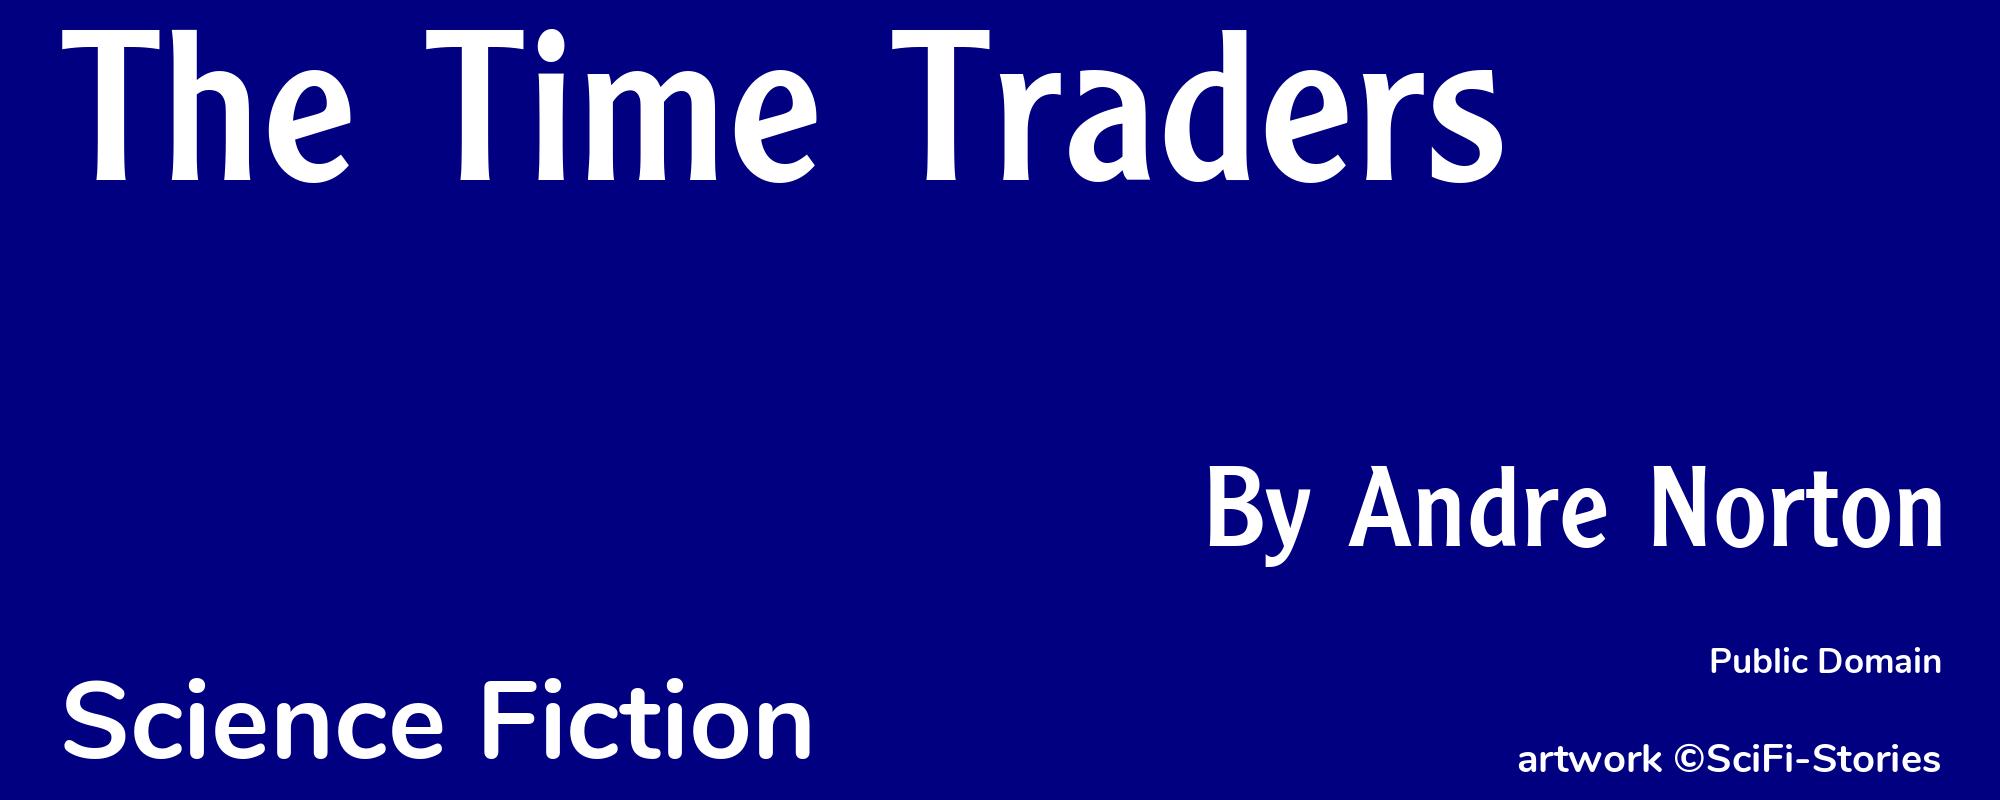 The Time Traders - Cover